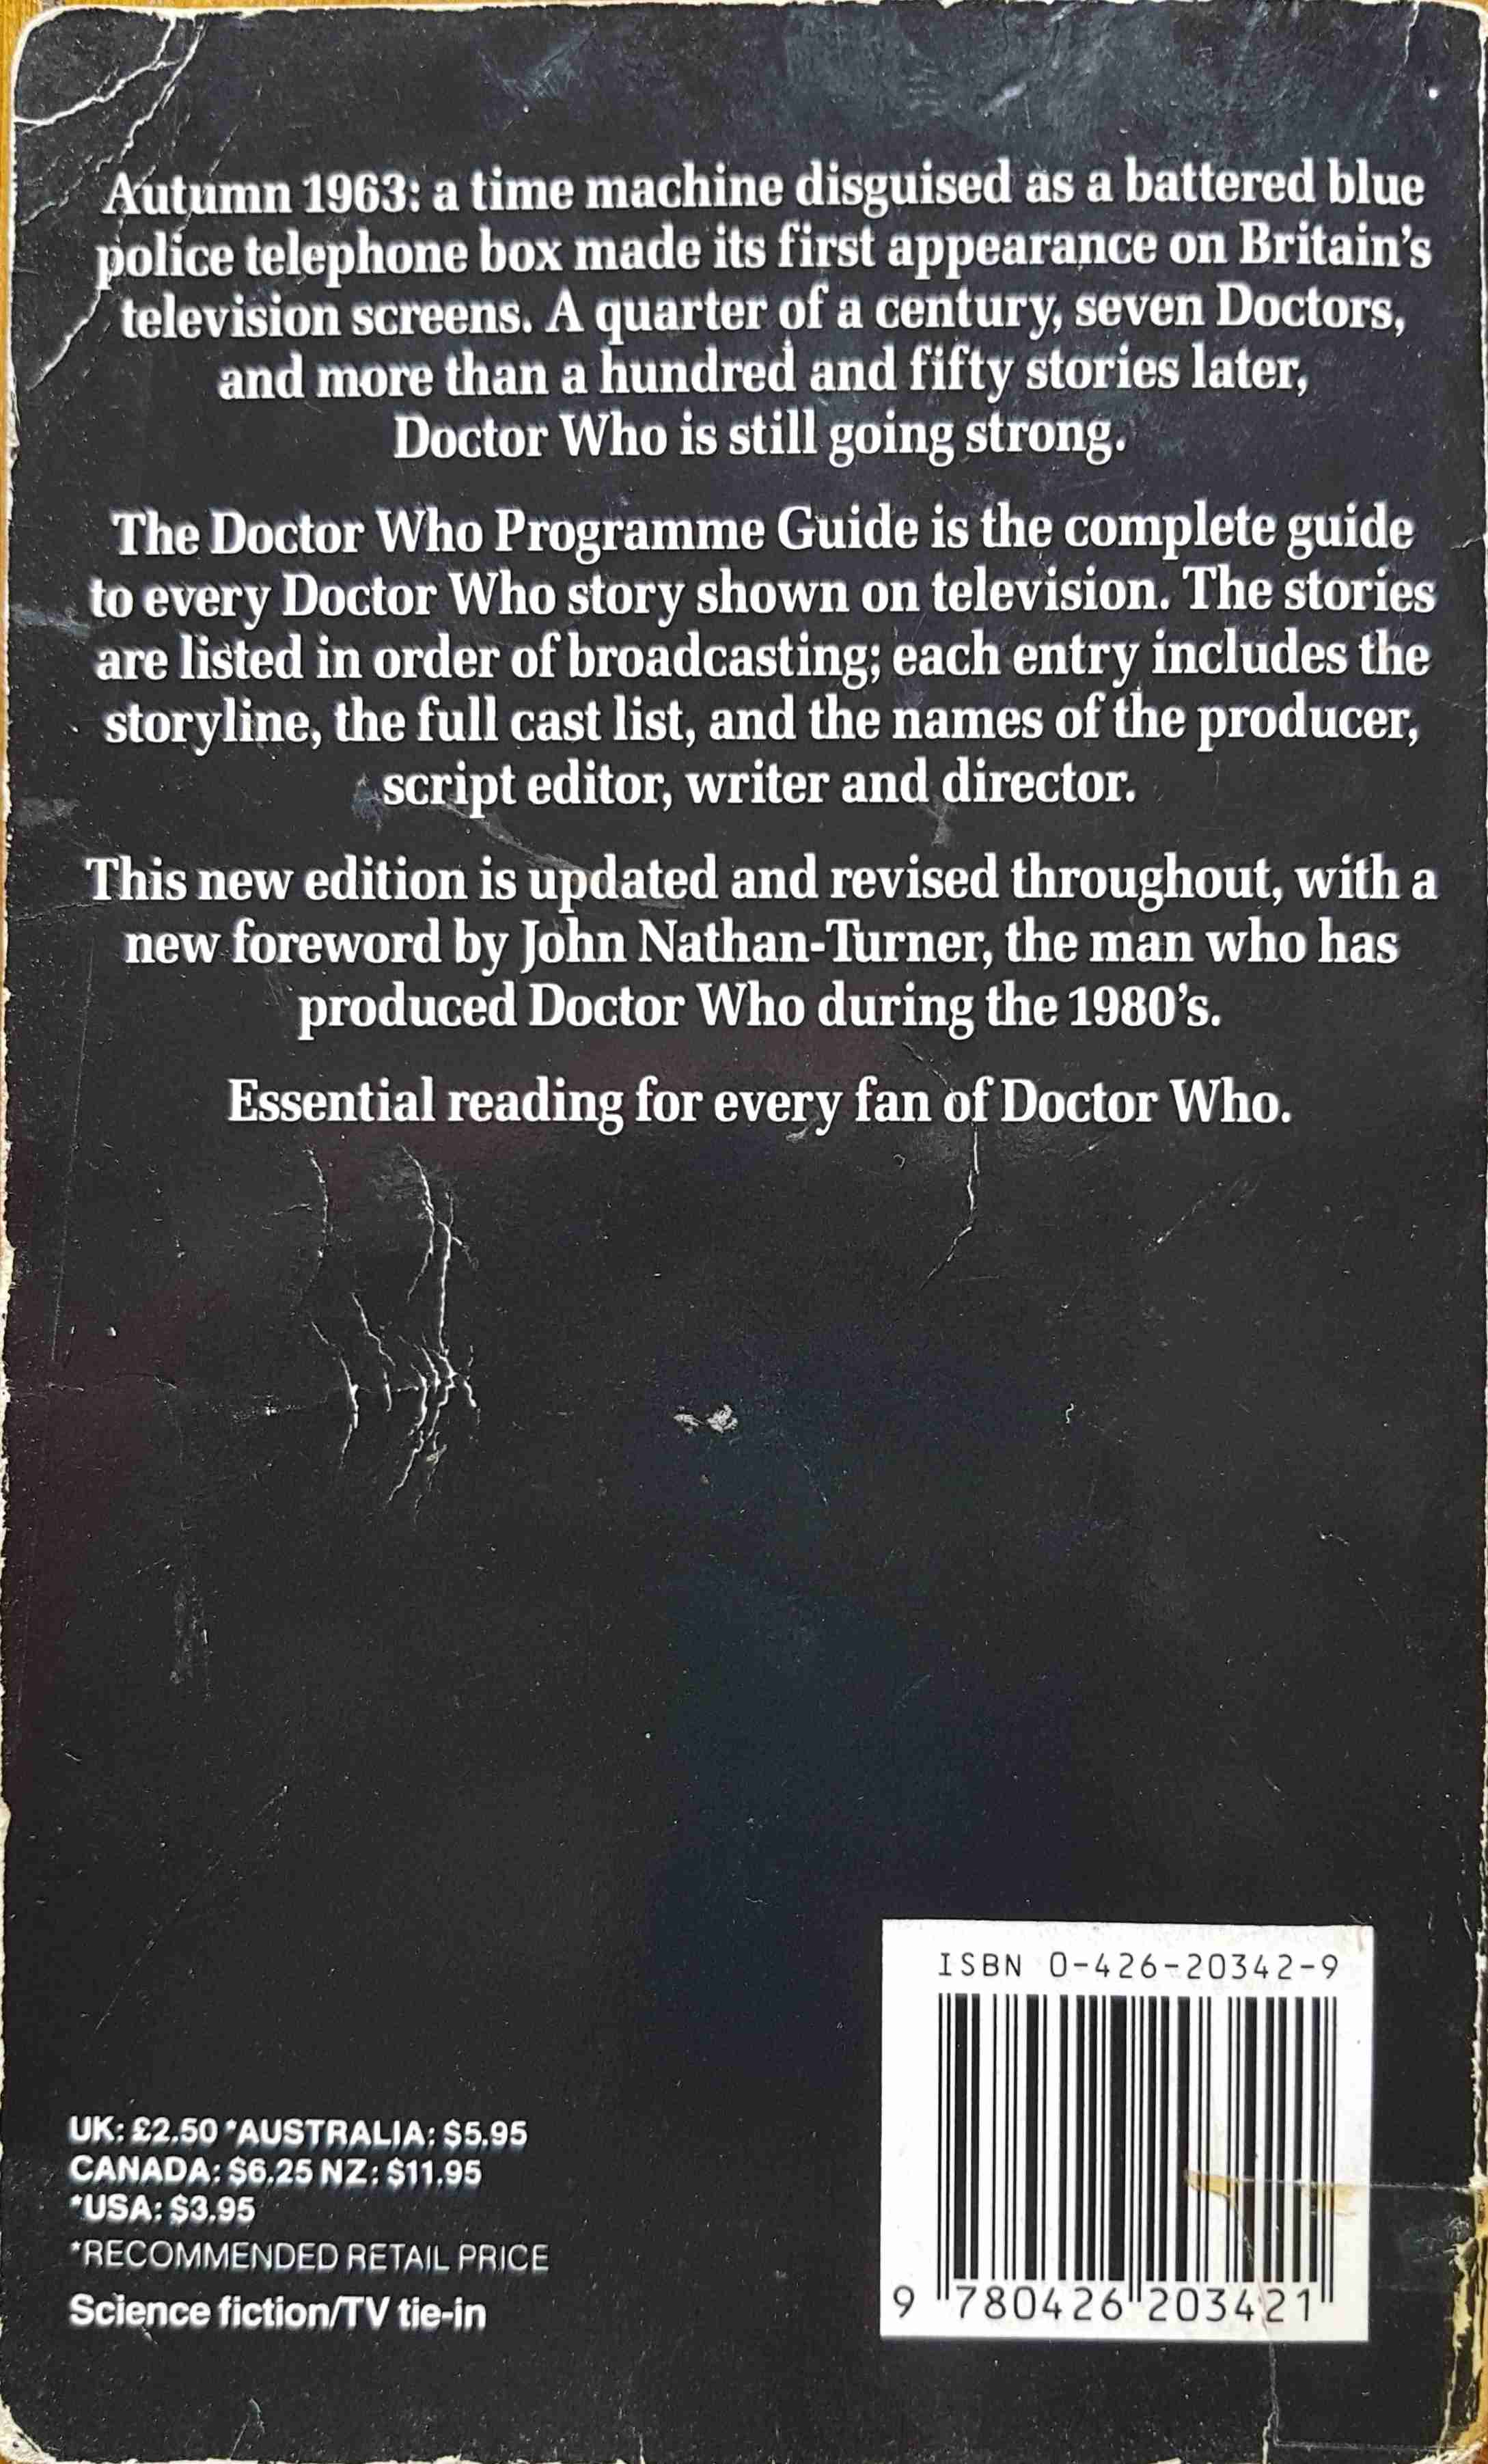 Picture of 0-426-20342-9 Doctor Who - Programme guide by artist Jean-Marc L'officier from the BBC records and Tapes library